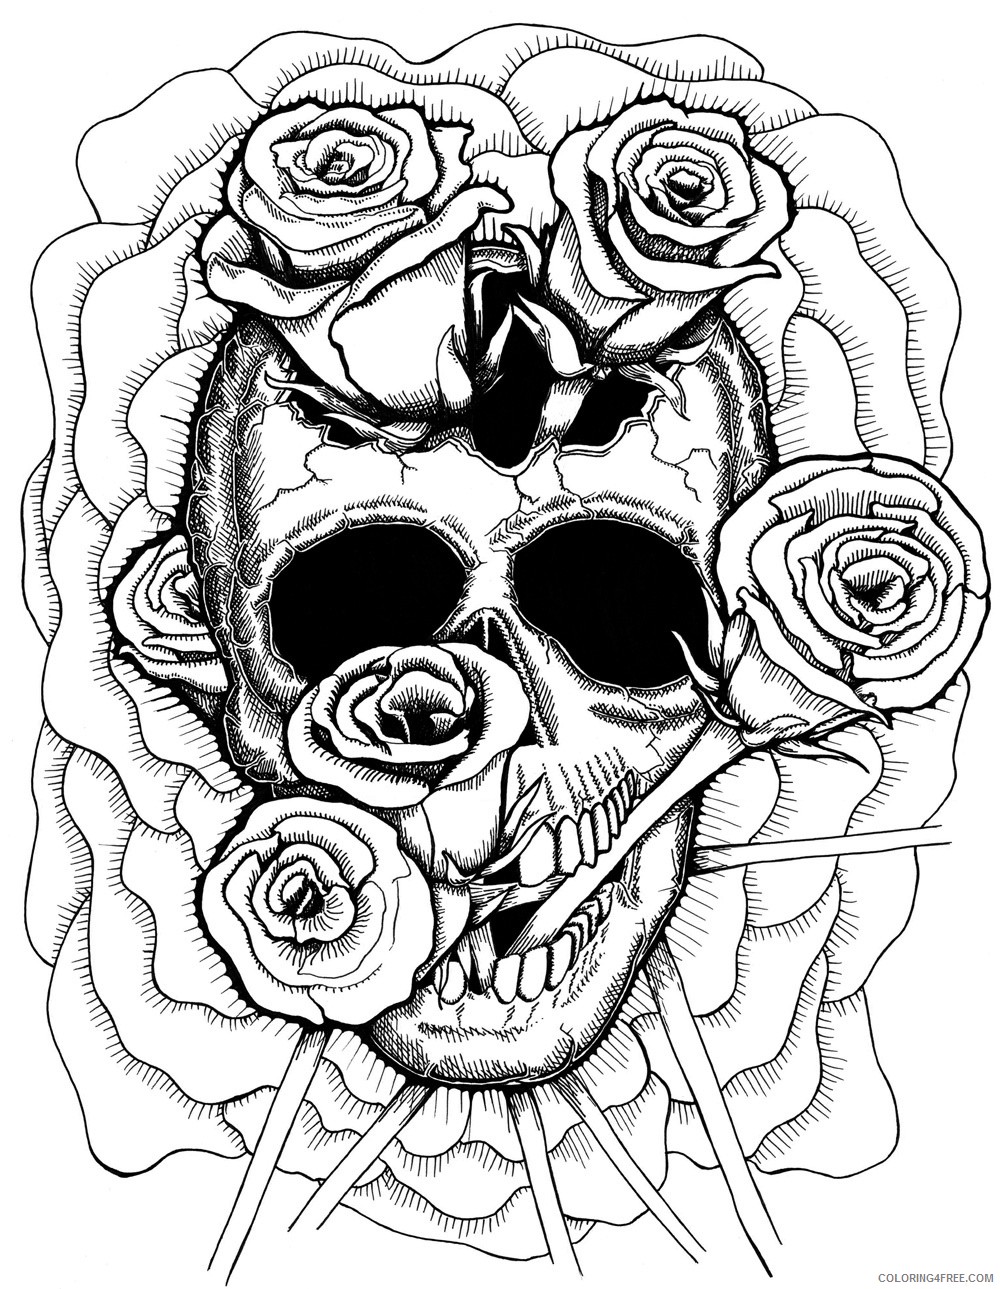 trippy coloring pages skull and roses Coloring4free - Coloring4Free.com